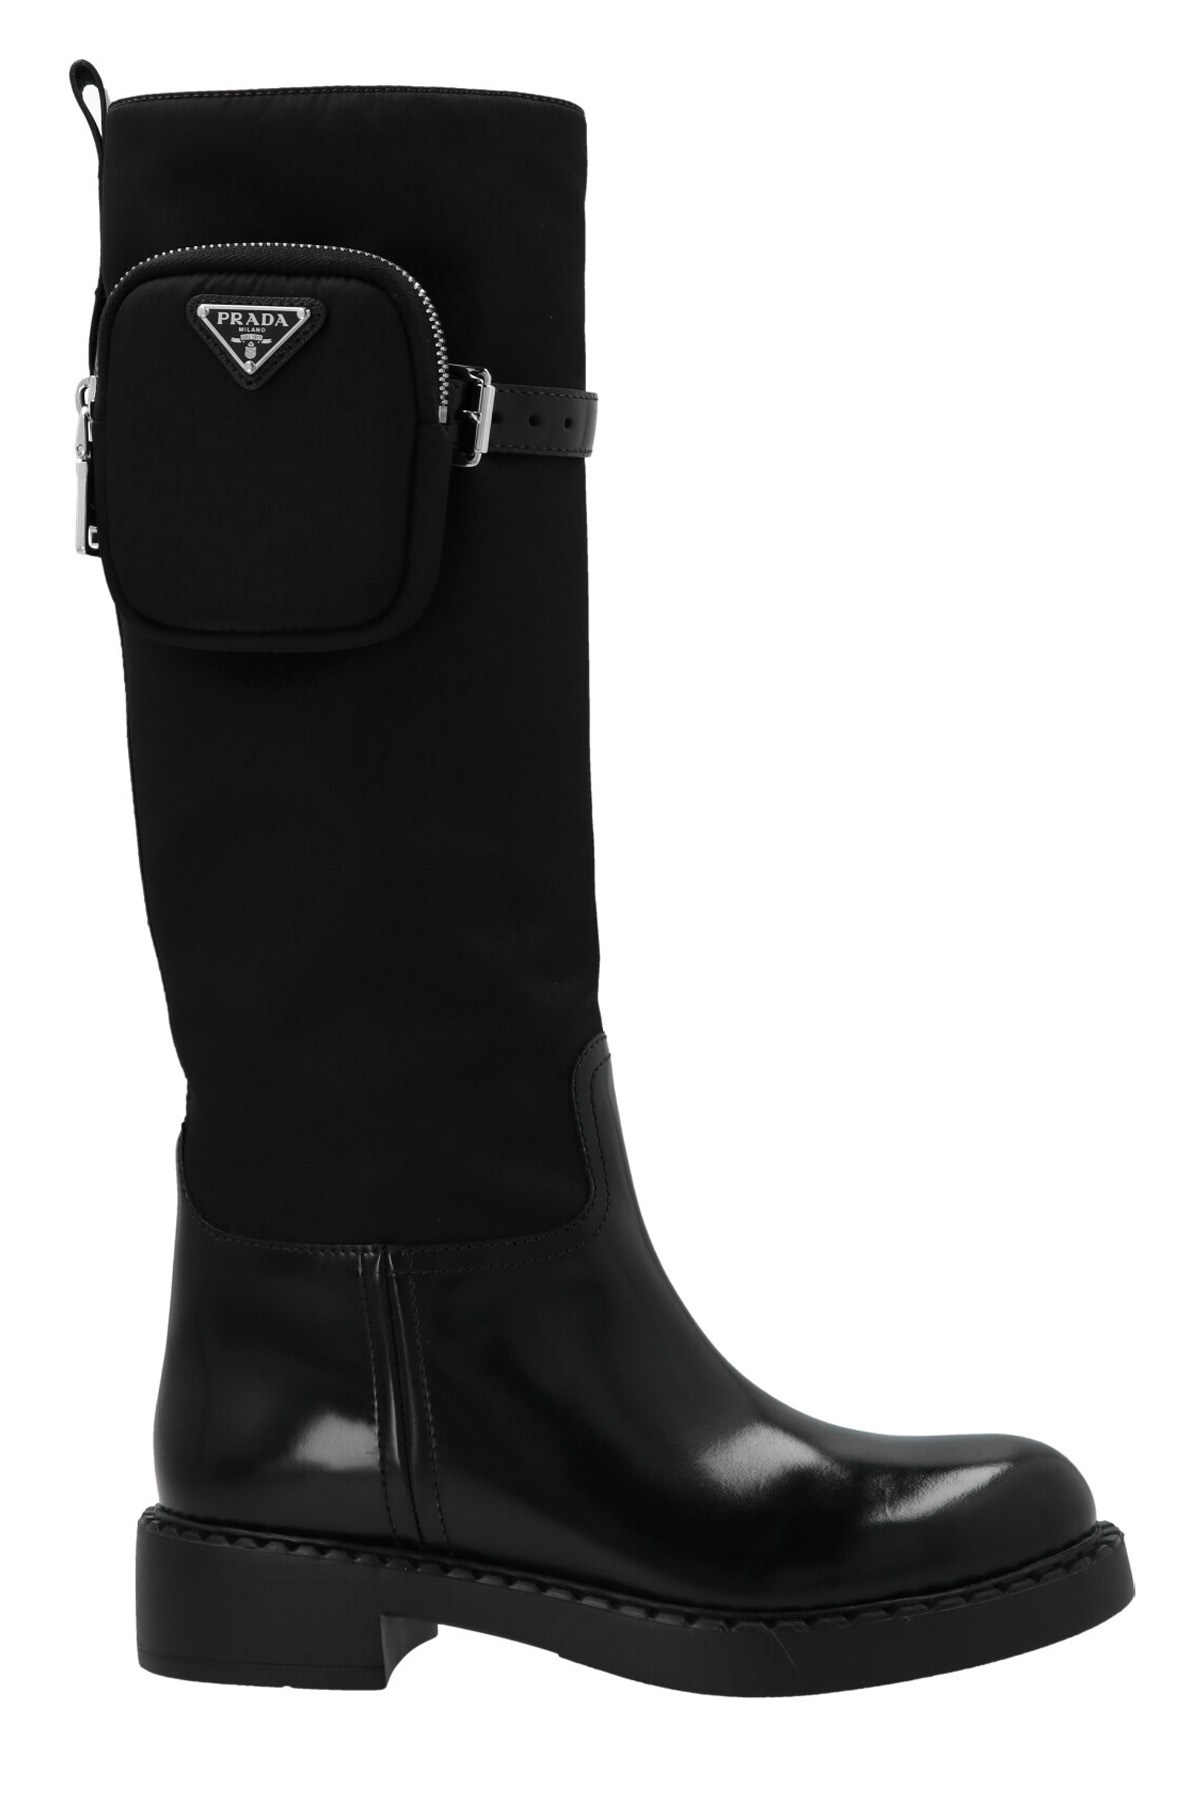 PRADA Leather And Nylon Boots With A Pouch